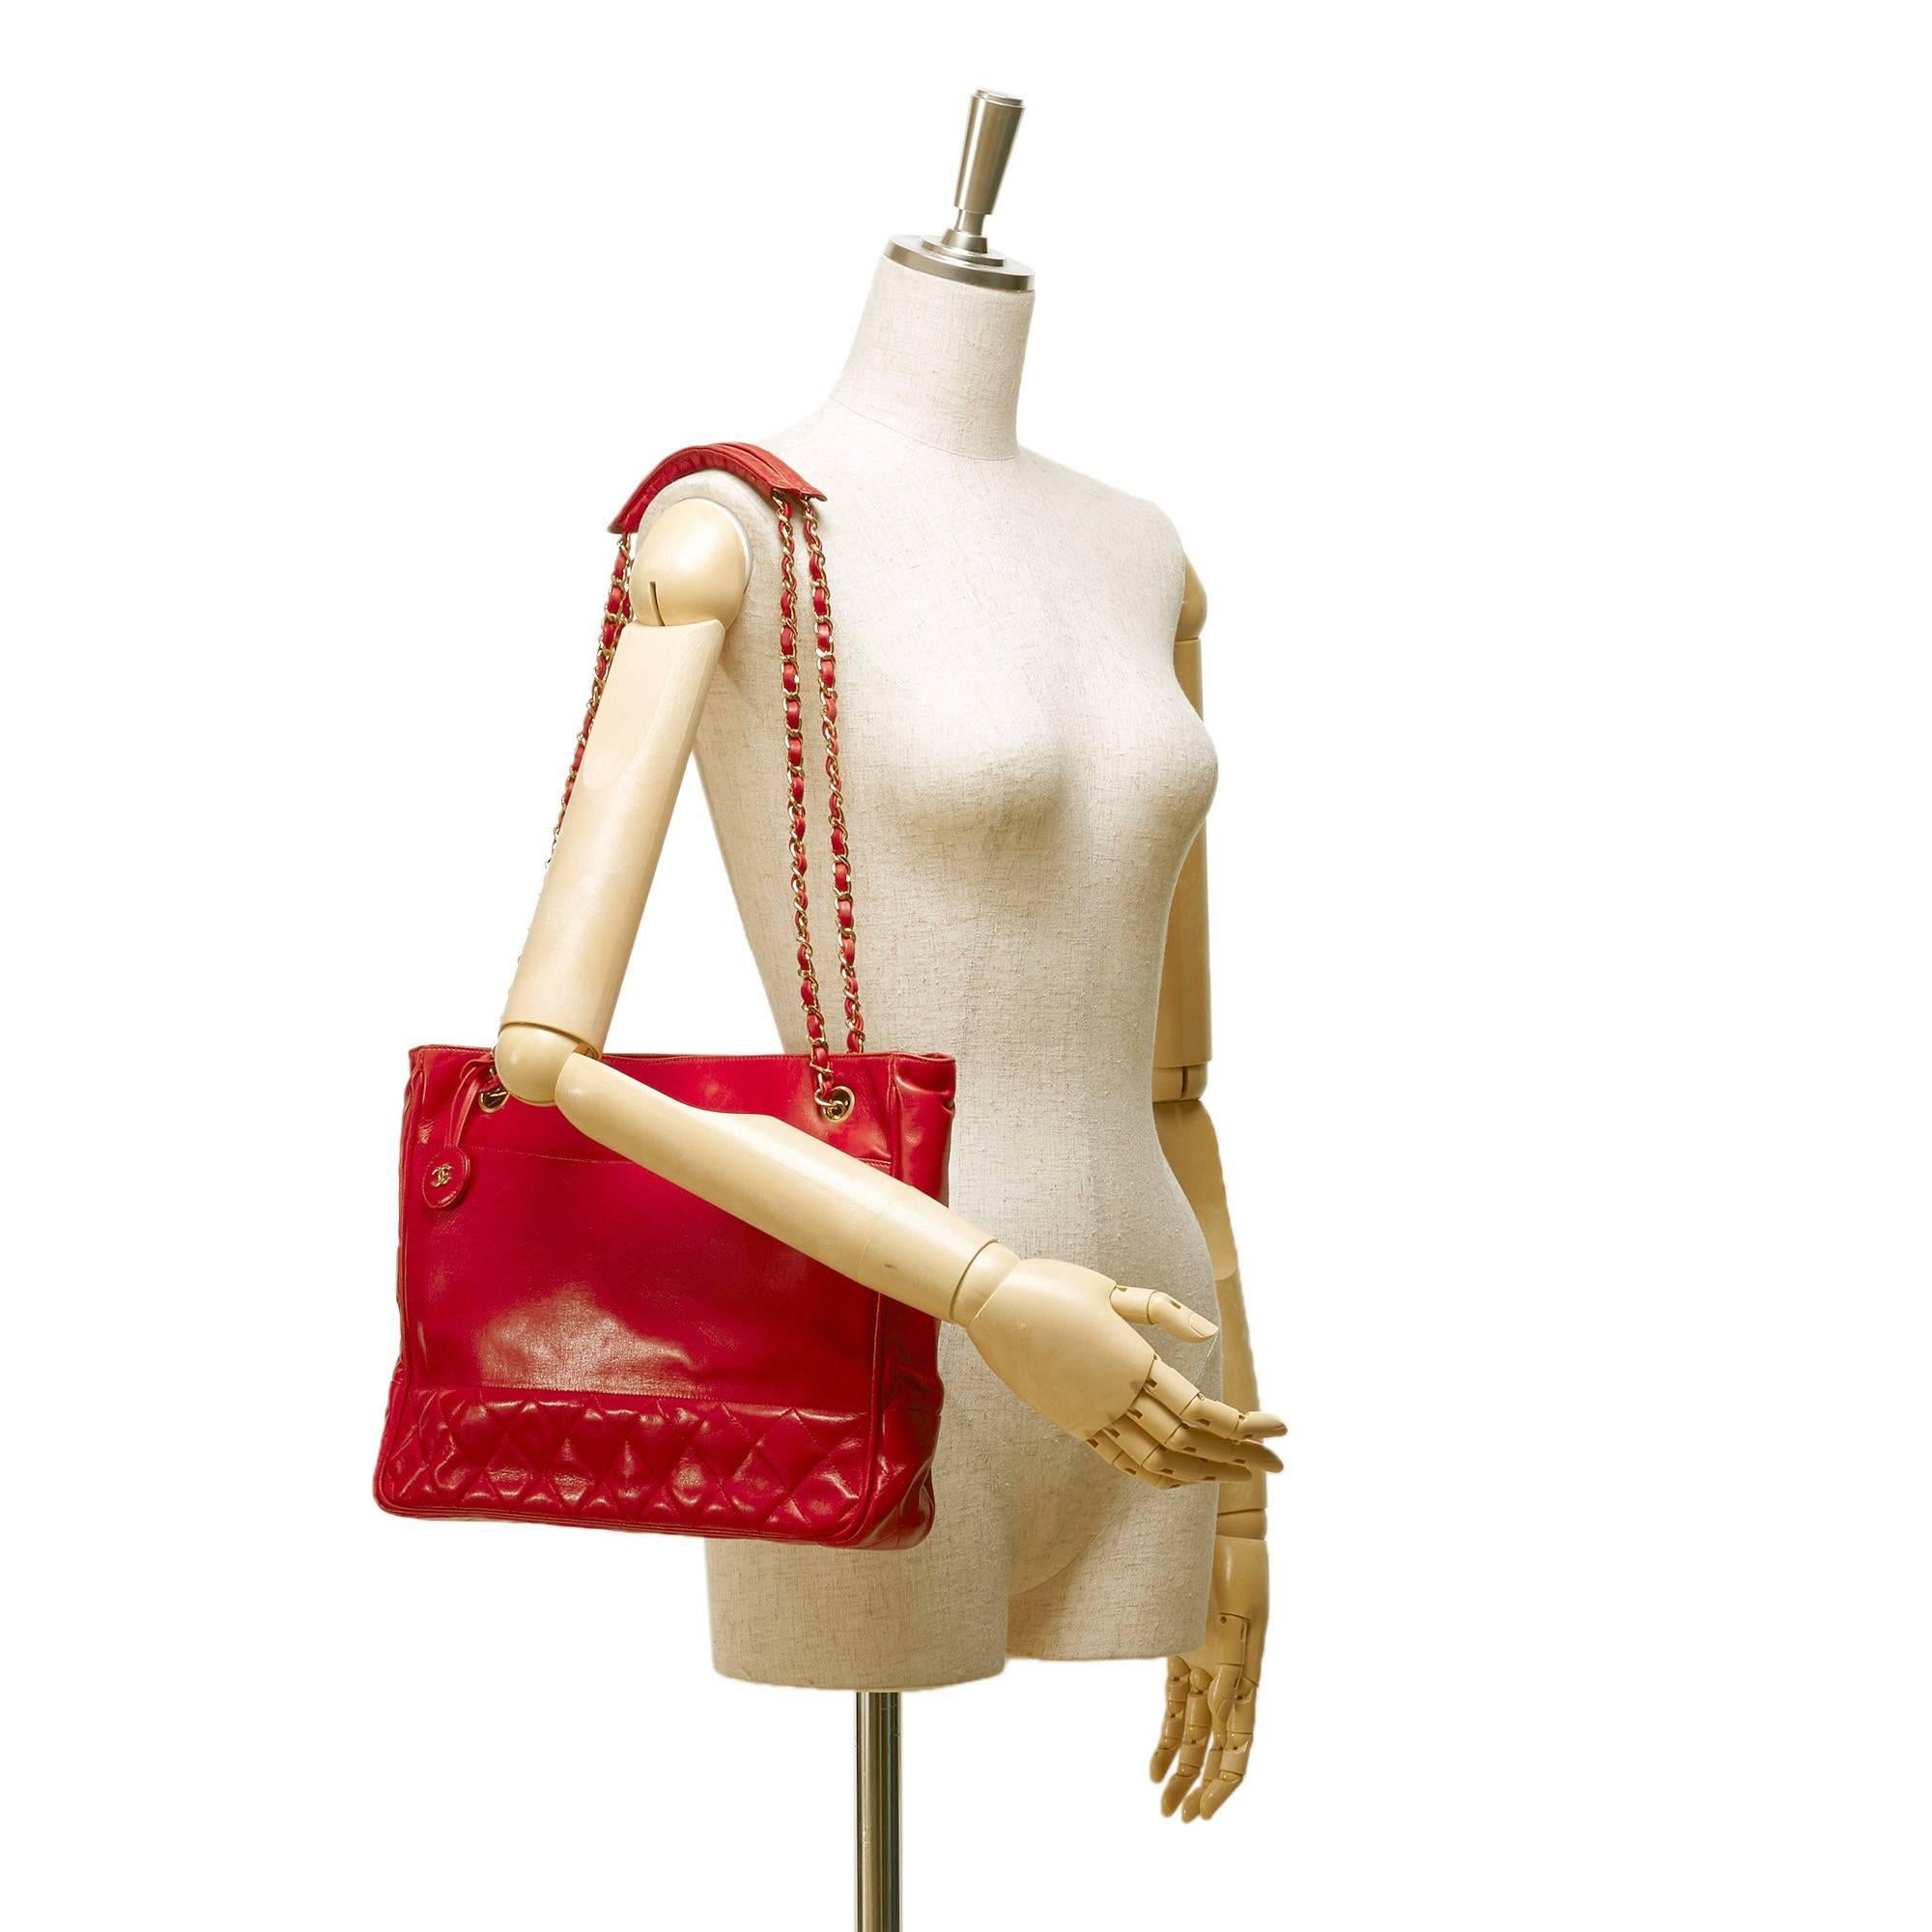 - This Vintage late 80s Chanel red lambskin leather shoulder bag features gold toned chain, exterior slip pocket, open top with magnetic closure, and interior zip pockets. This rare and more than 30 years Chanel bag is one of a kind. 

- Made in